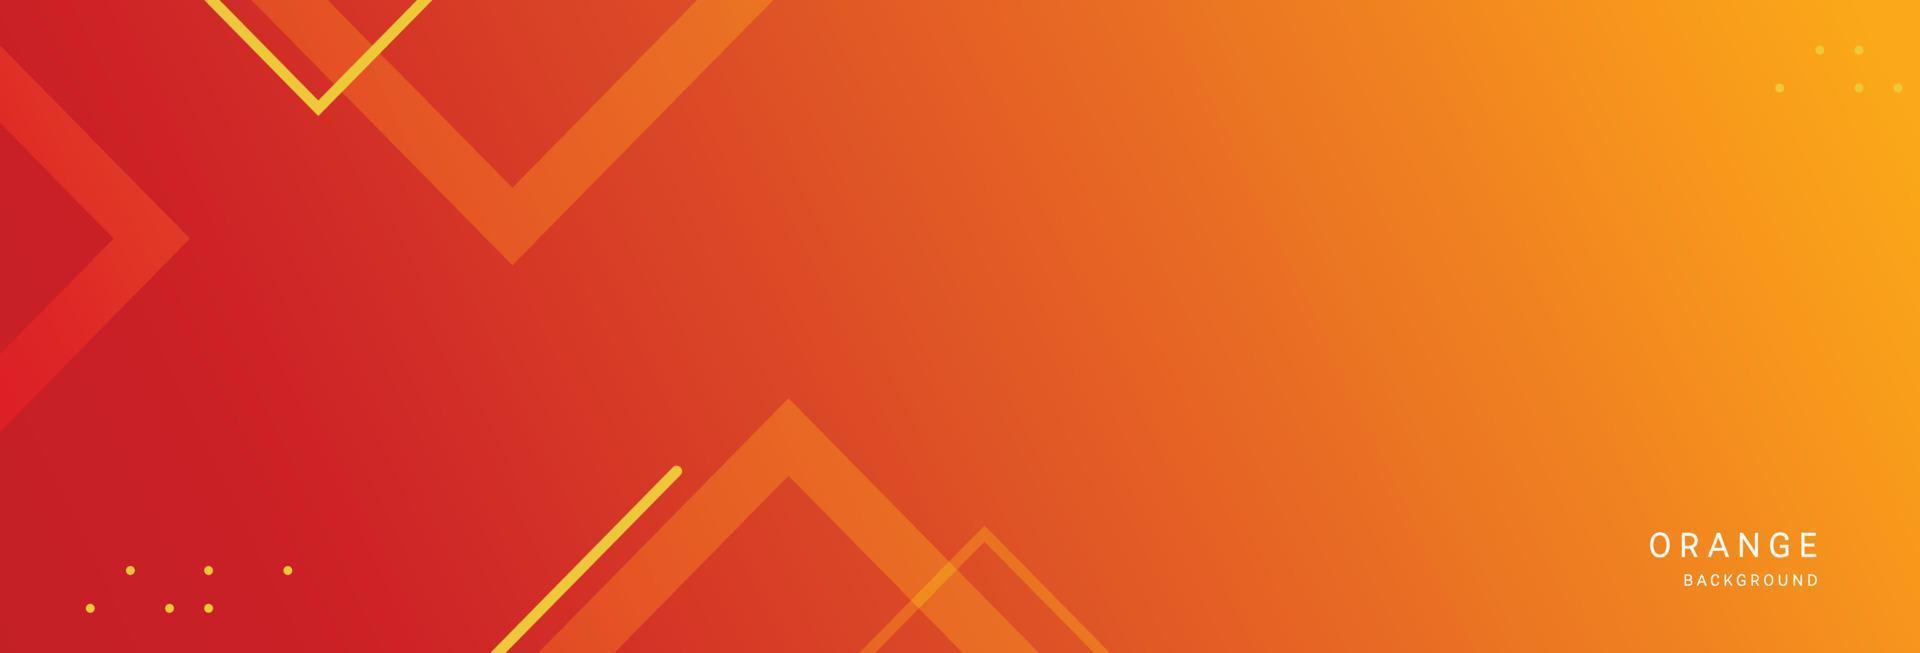 Trendy abstract backgrounds for poster and print designs. wallpapers with minimal style and unique gradation colors. modern cover for a professional design look vector